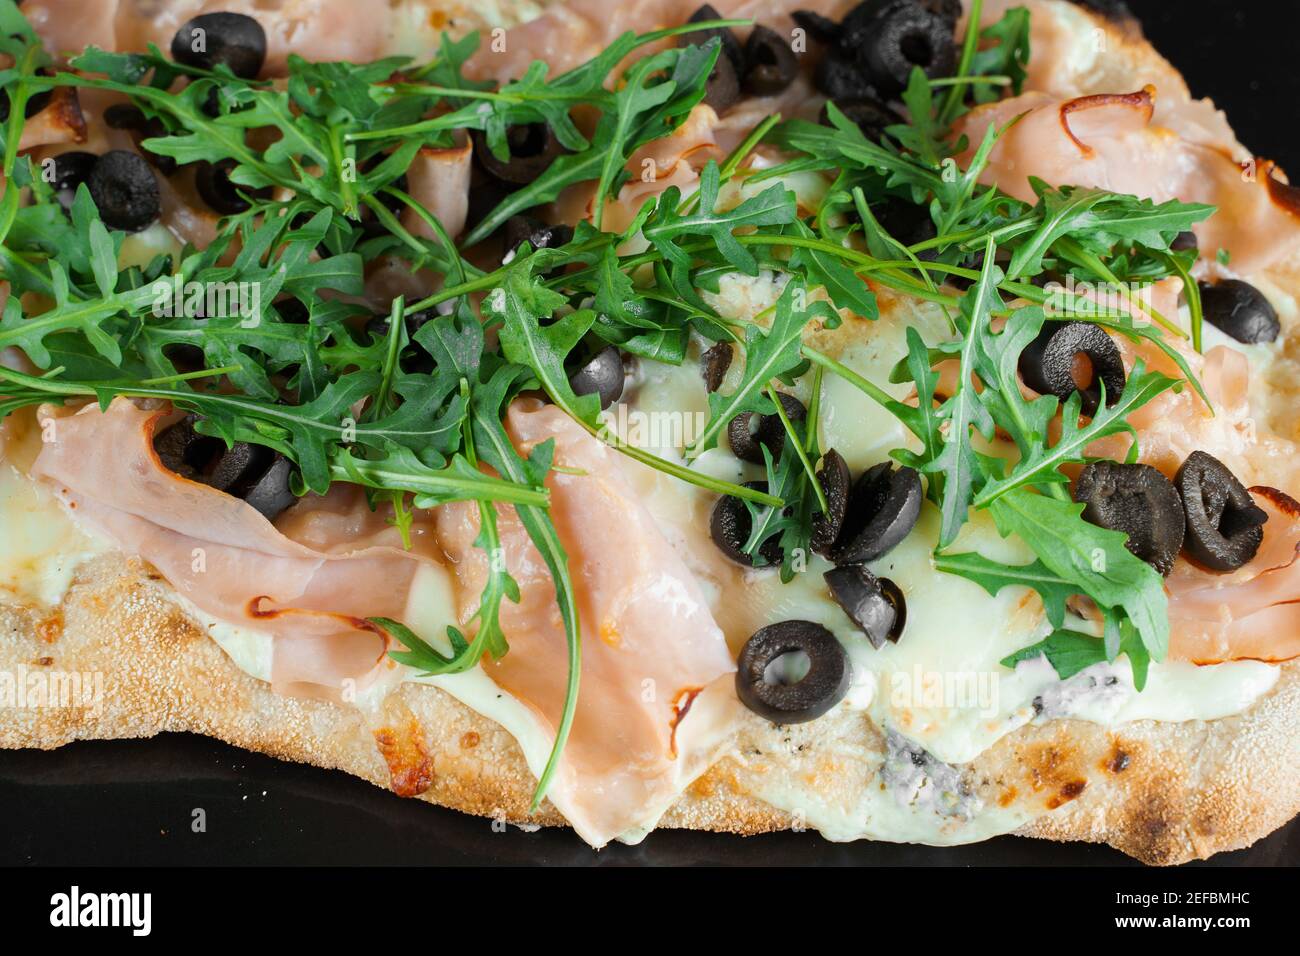 - close-up. aru Scrocchiarella Pinsa Food dish. pizzeria. delivery black with romana traditional gourmet Stock on Pinsa meat, cuisine from italian Alamy Photo background.